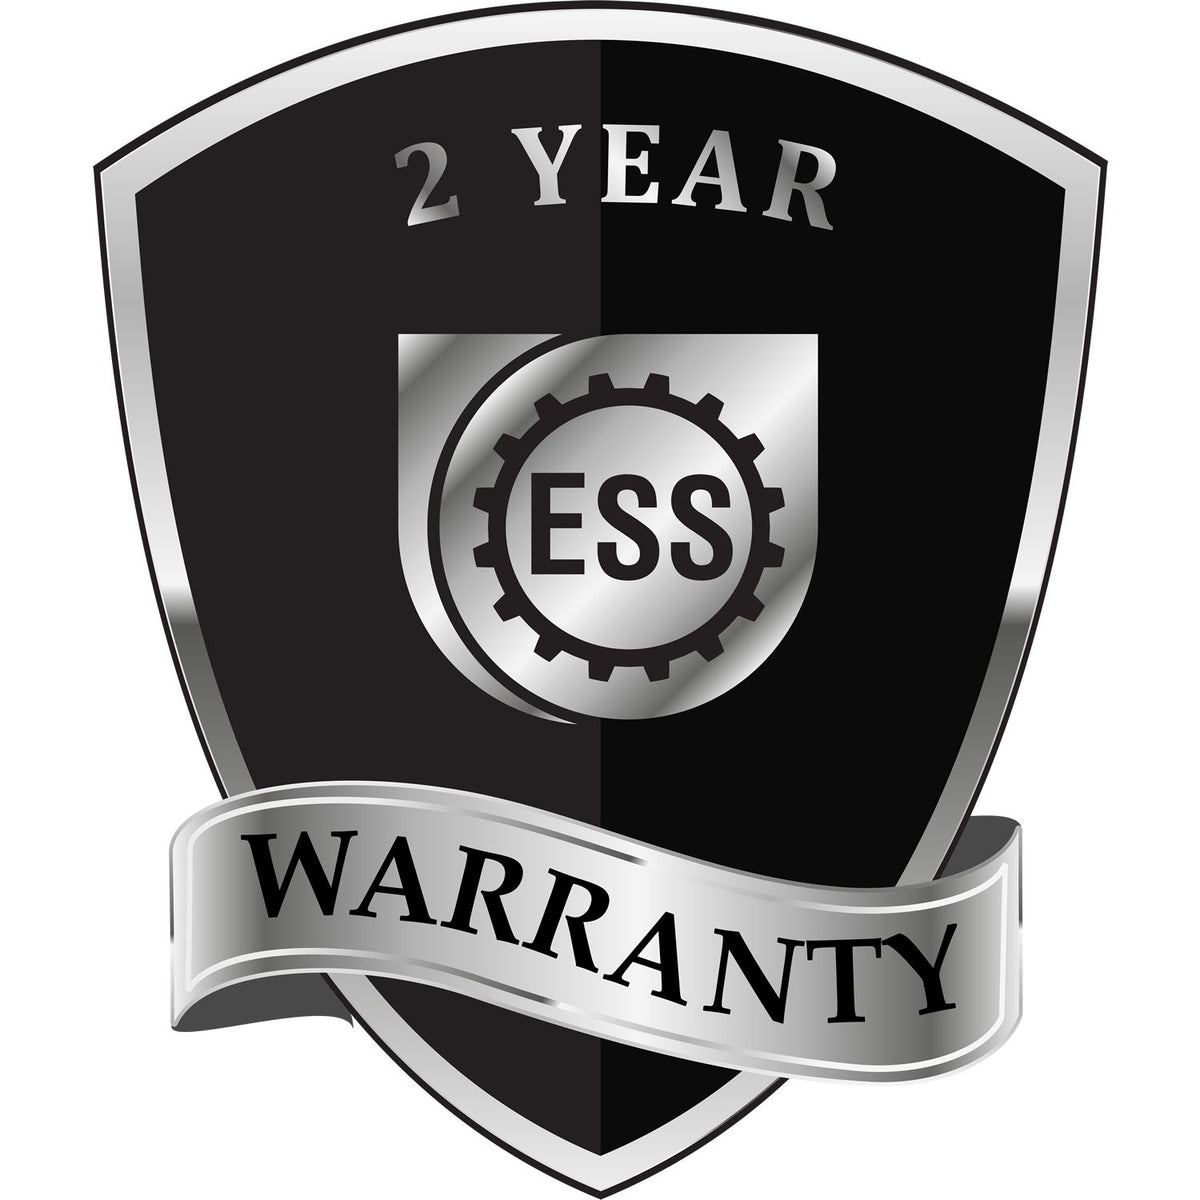 A black and silver badge or emblem showing warranty information for the Gift Montana Geologist Seal